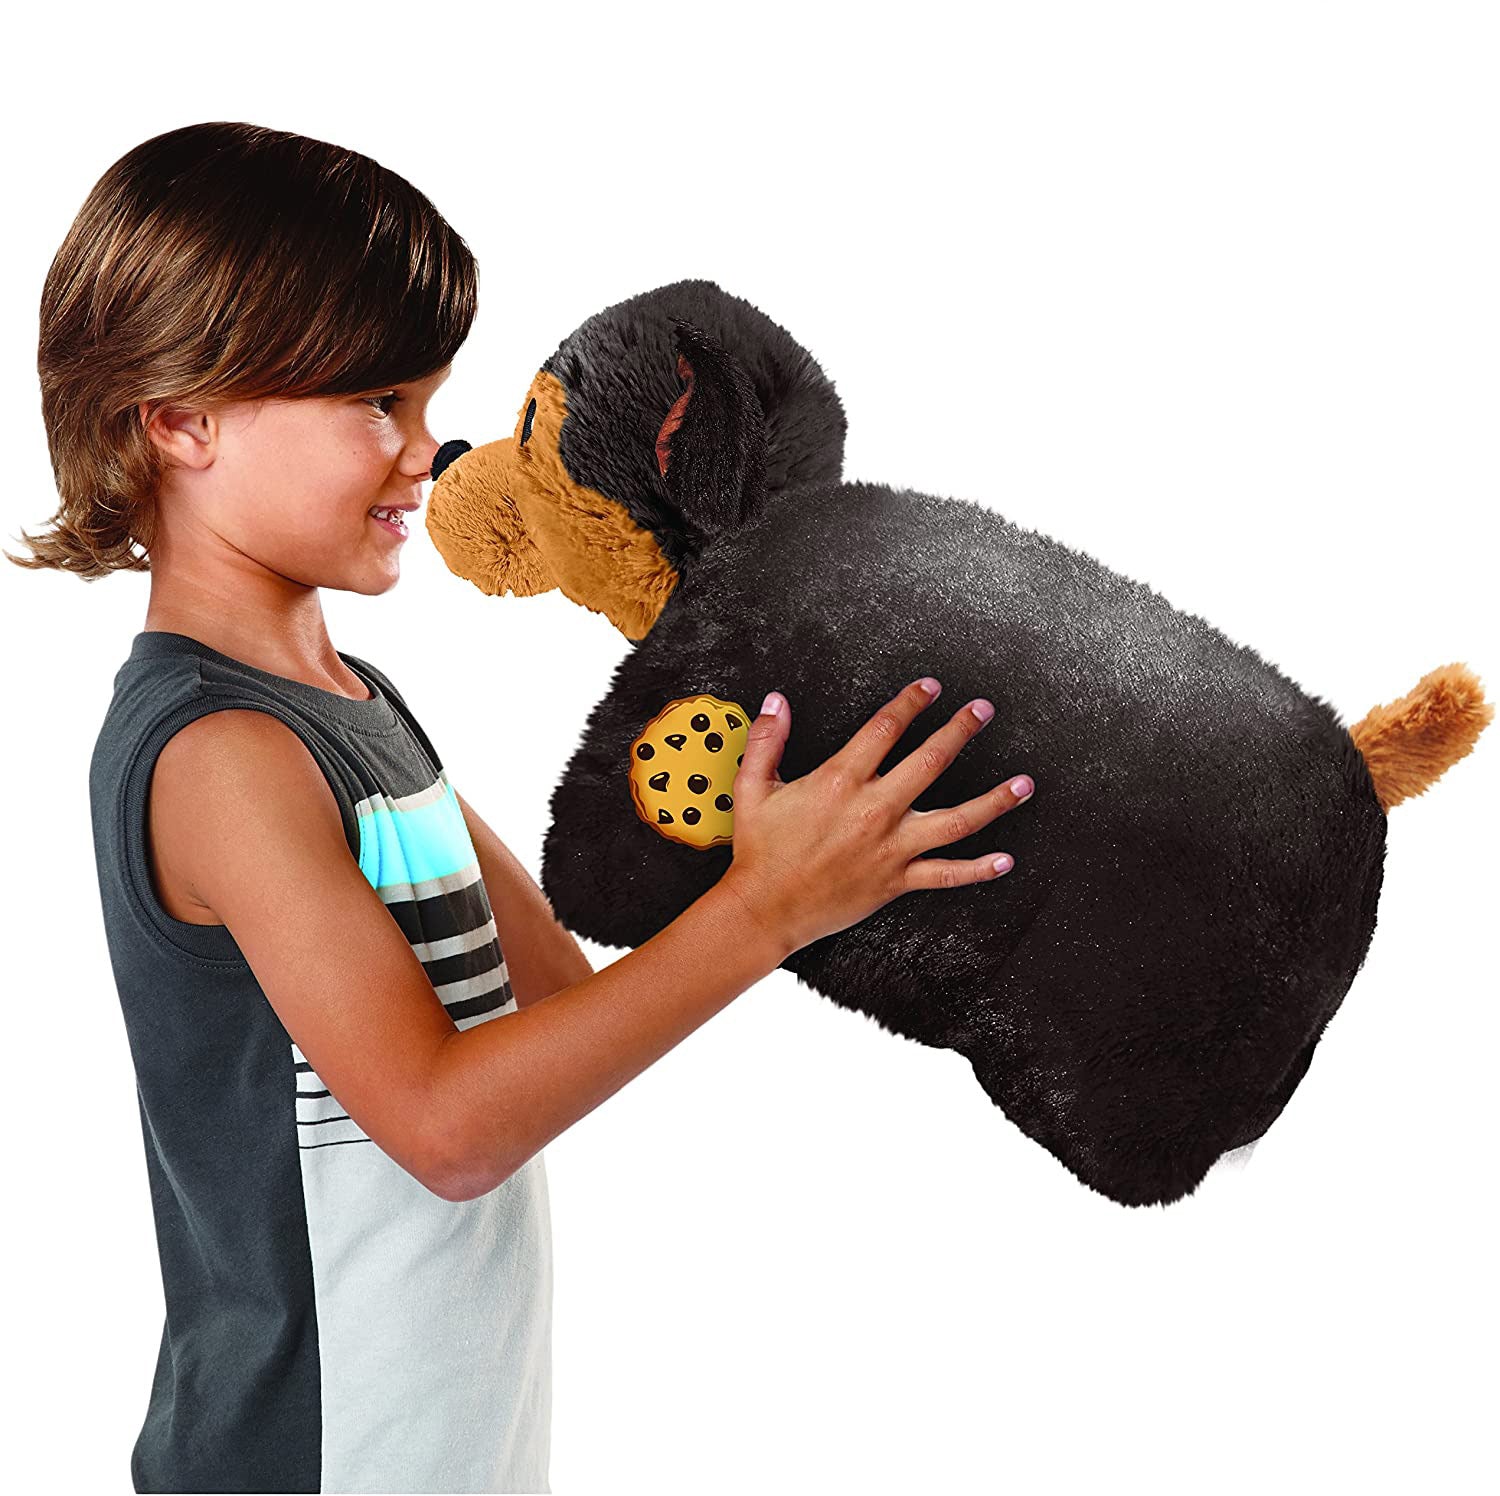 Sensorii's scented toys - Boy carrying Sensorii's scented teddy with cookie smell